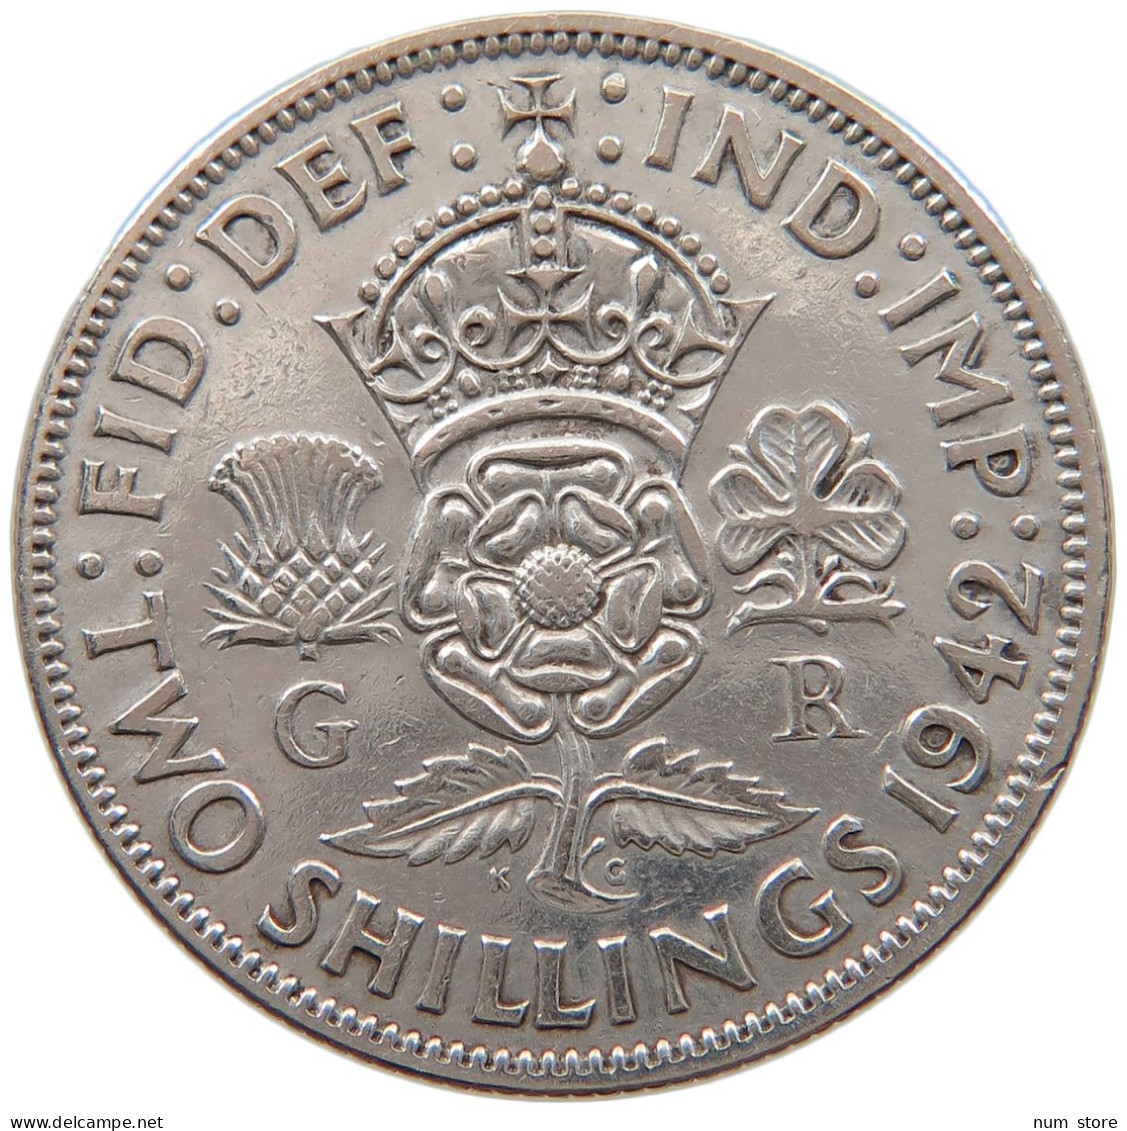 GREAT BRITAIN TWO SHILLINGS 1942 George VI. (1936-1952) #a052 0099 - J. 1 Florin / 2 Shillings